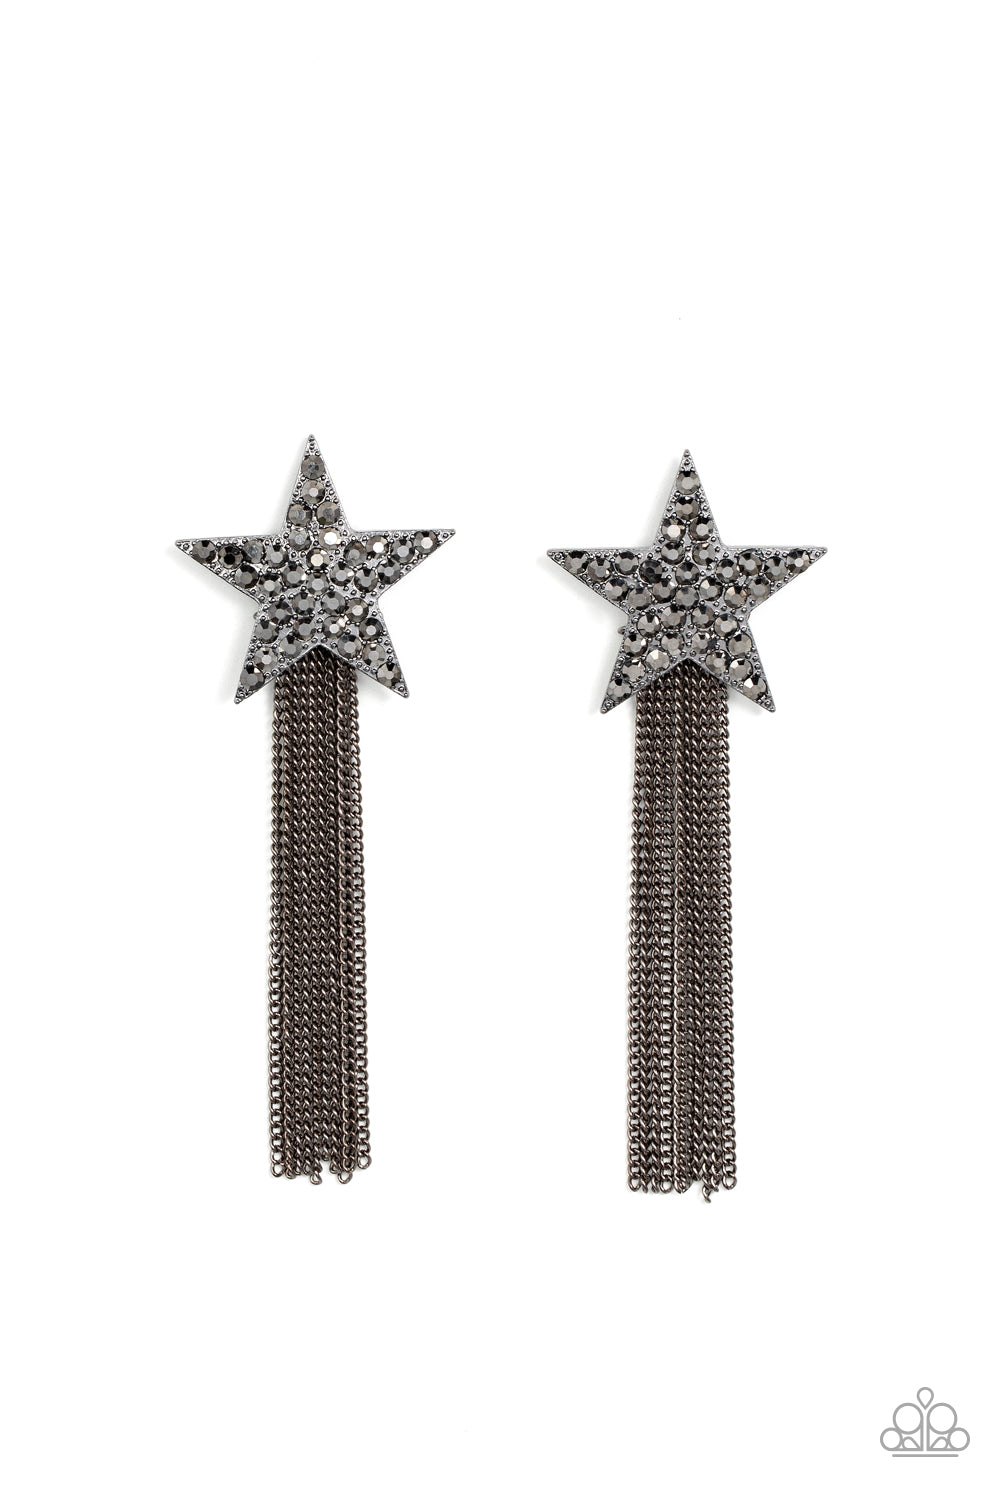 A curtain of gunmetal chains streams out from the bottom of an oversized gunmetal star encrusted in smoky hematite rhinestones, resulting in a stellar tassel. Earring attaches to a standard post fitting.